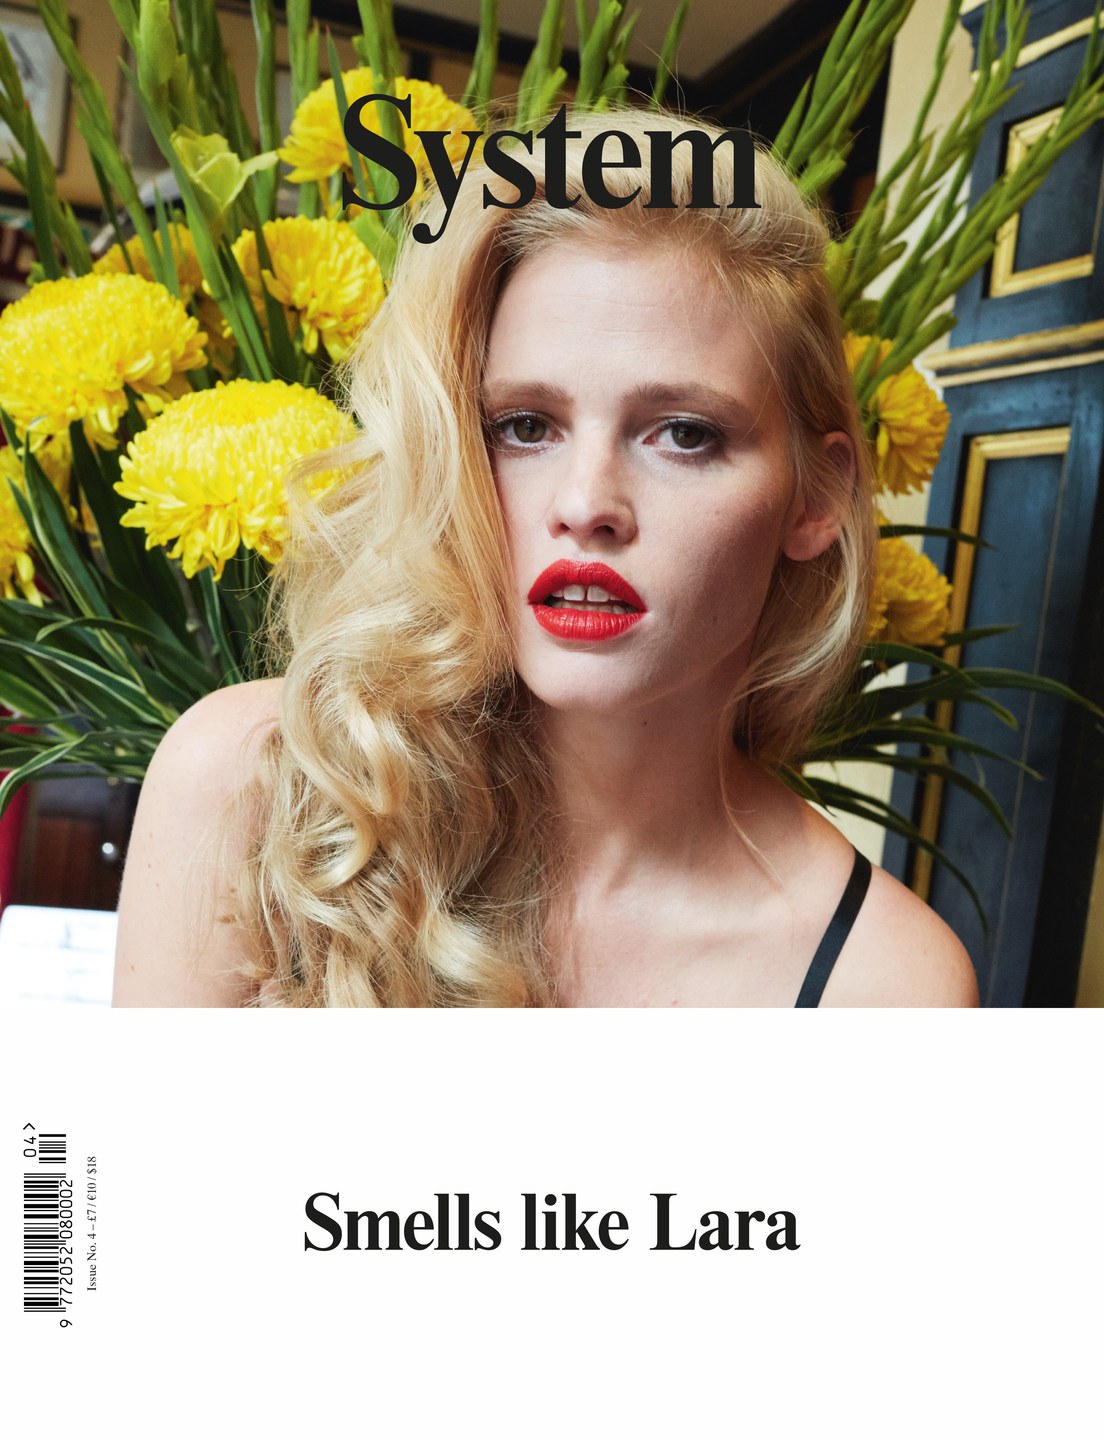 lara-stone-by-juergen-teller-for-system-magazine-fall-winter-2014-2015-0